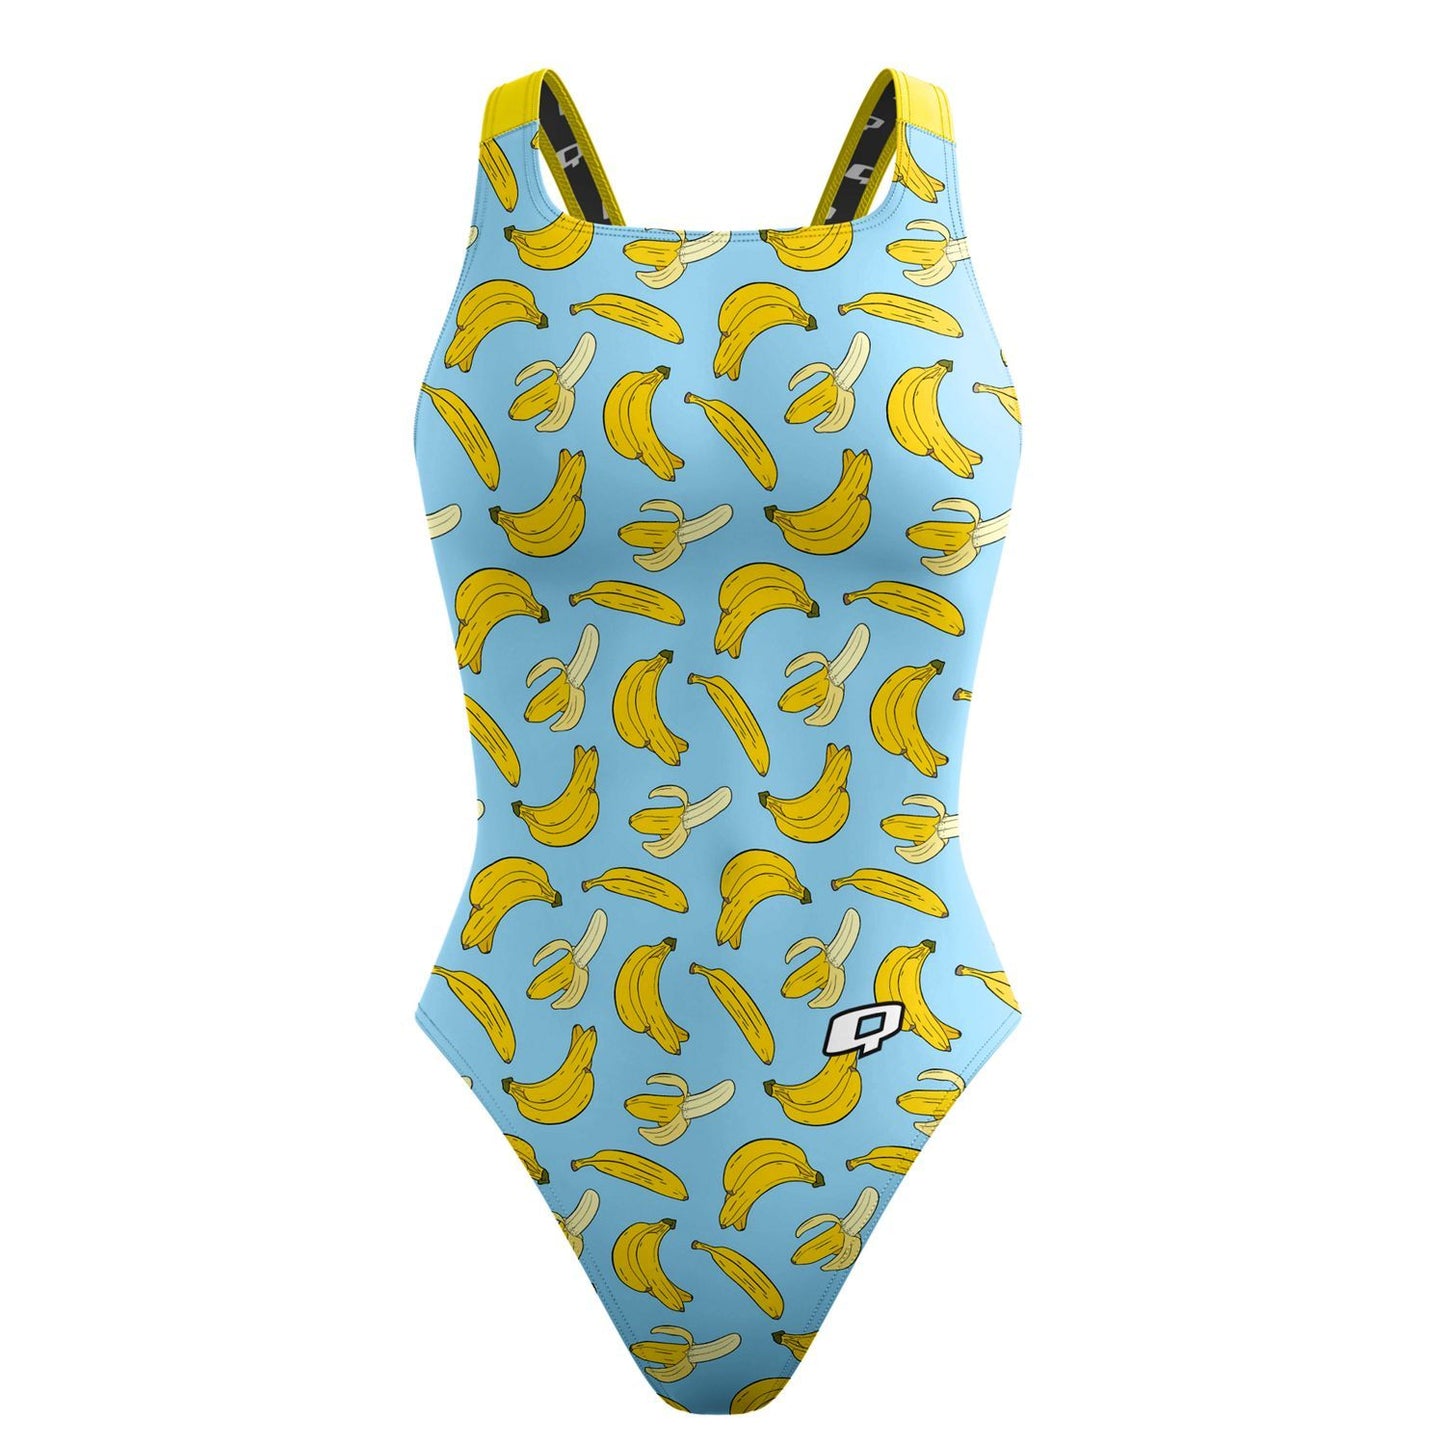 This Suit is Bananas Classic Strap